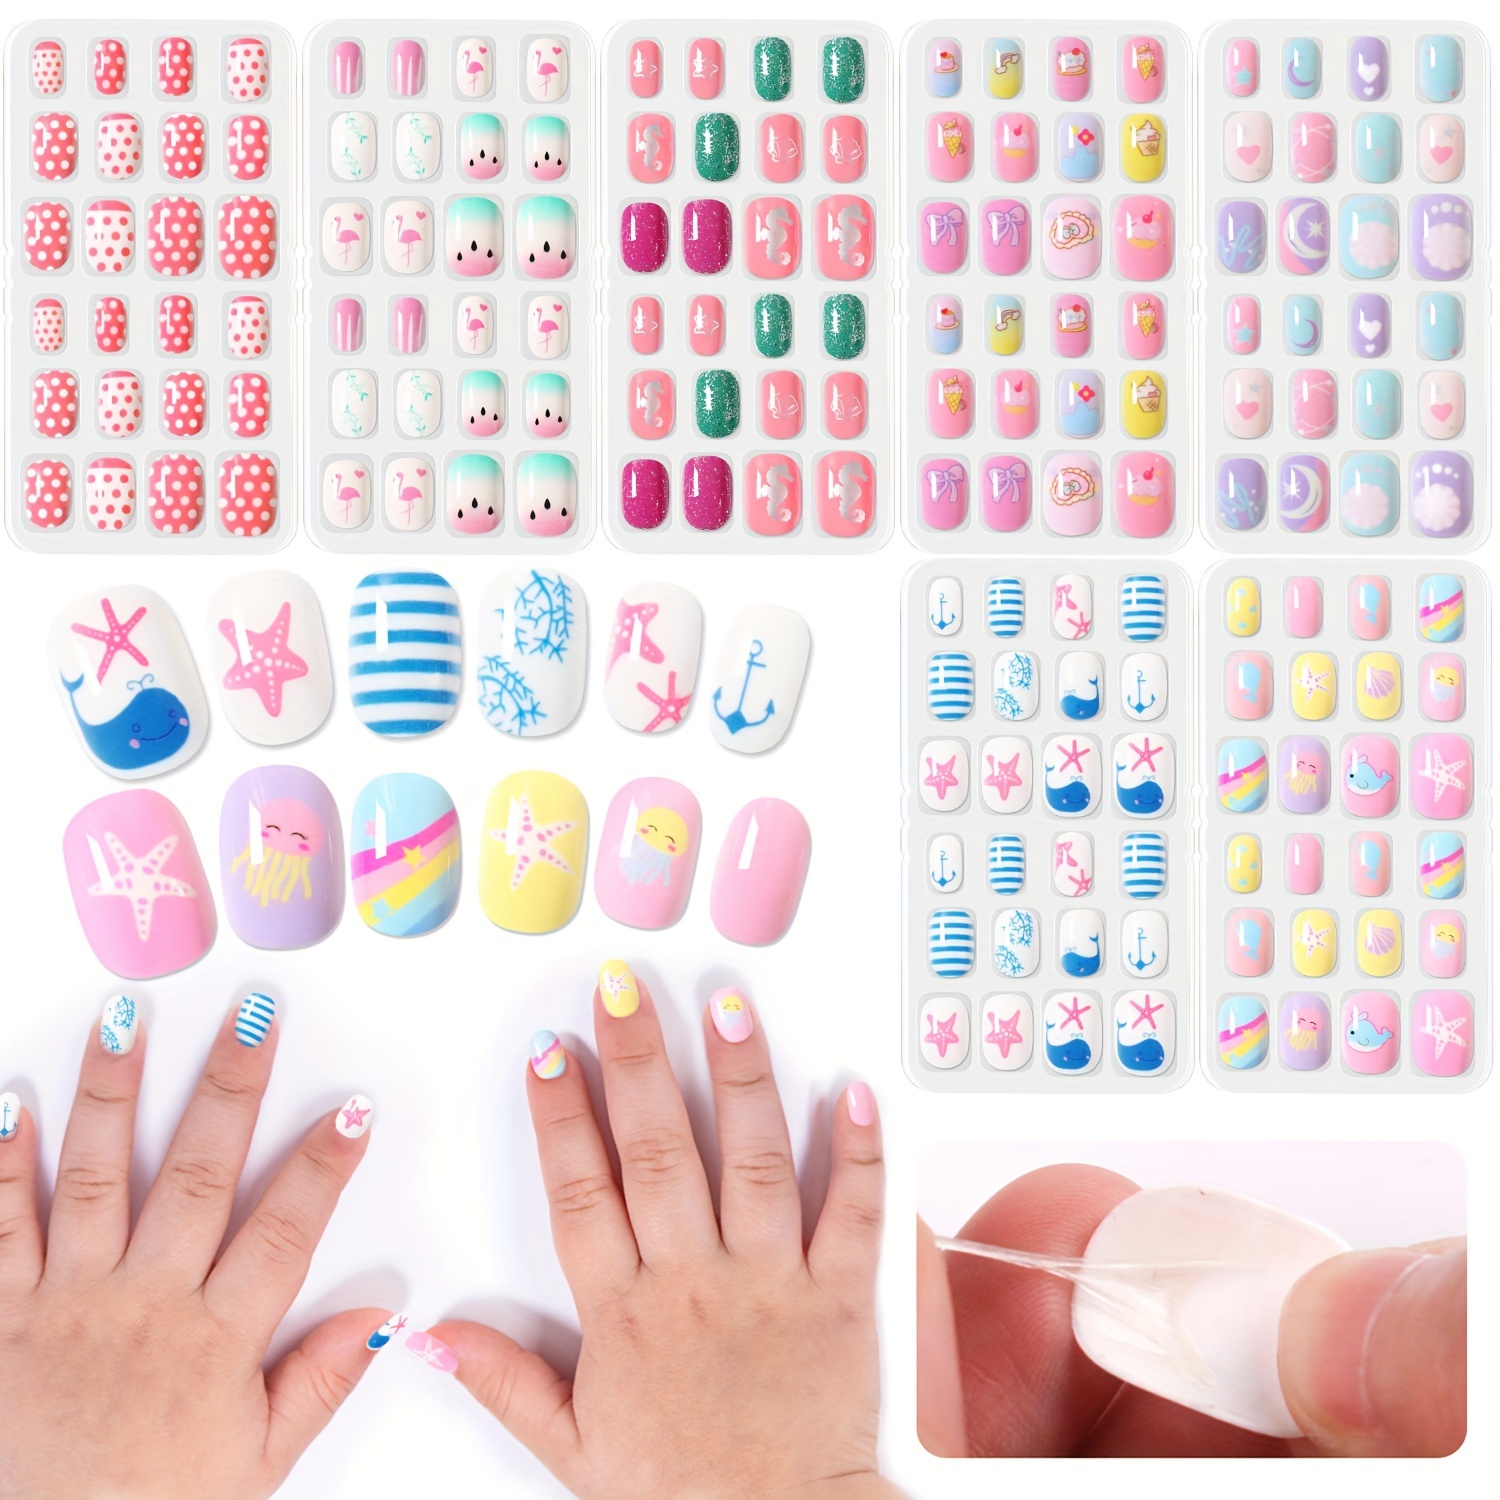 

Major Dijit 168-piece Nail Art Stickers Set - Self-adhesive, Alcohol-free Gel Nail Wraps For Easy Diy Manicures & Pedicures